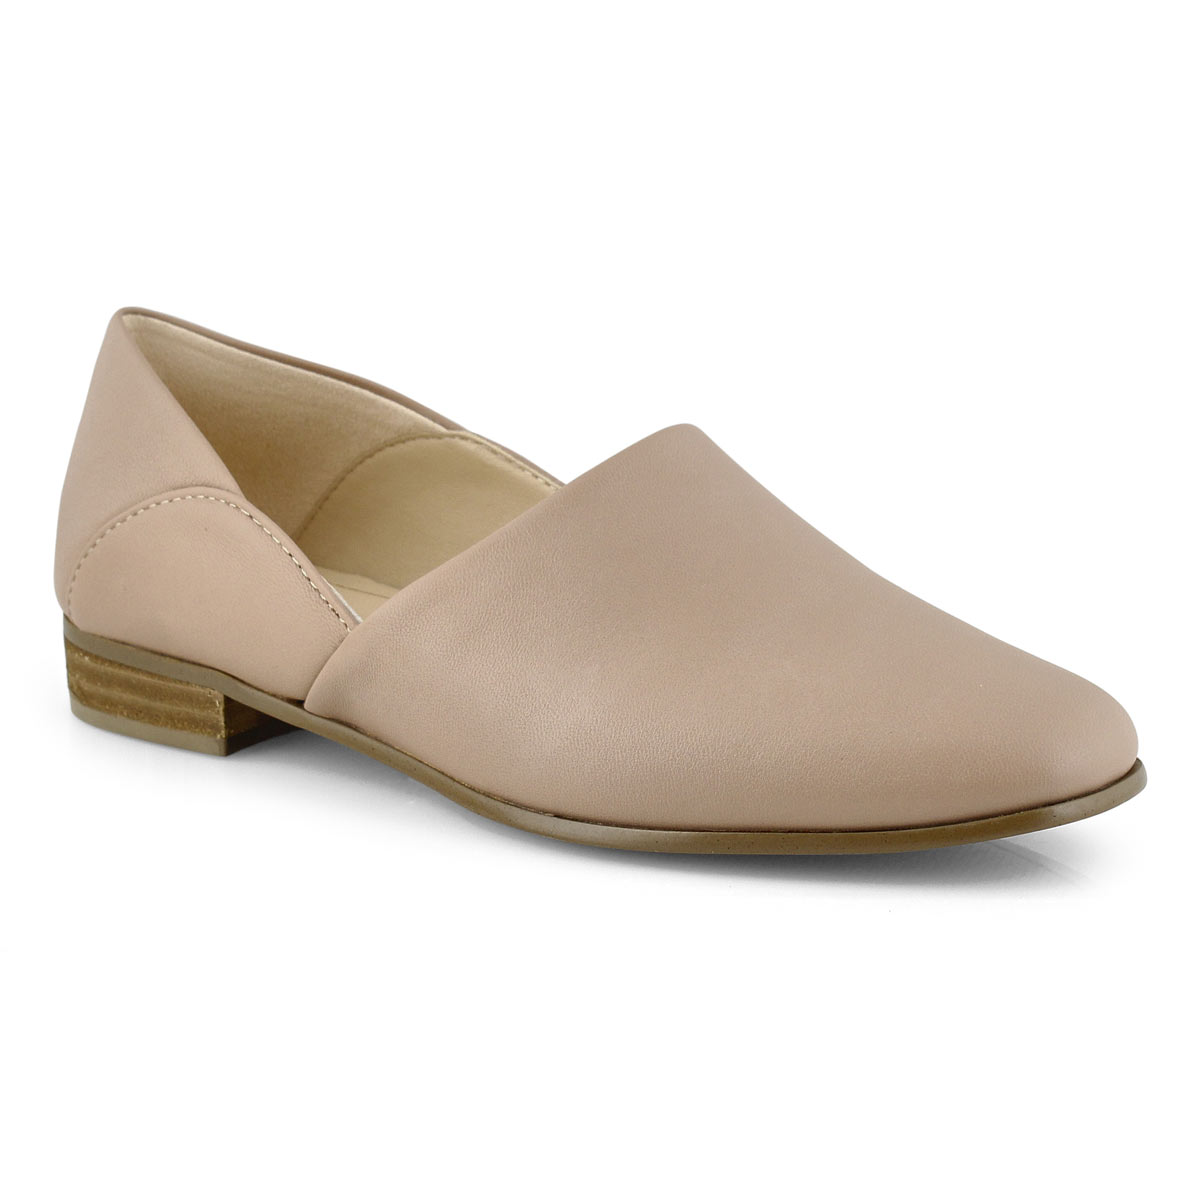 clarks women's pure tone loafer flat